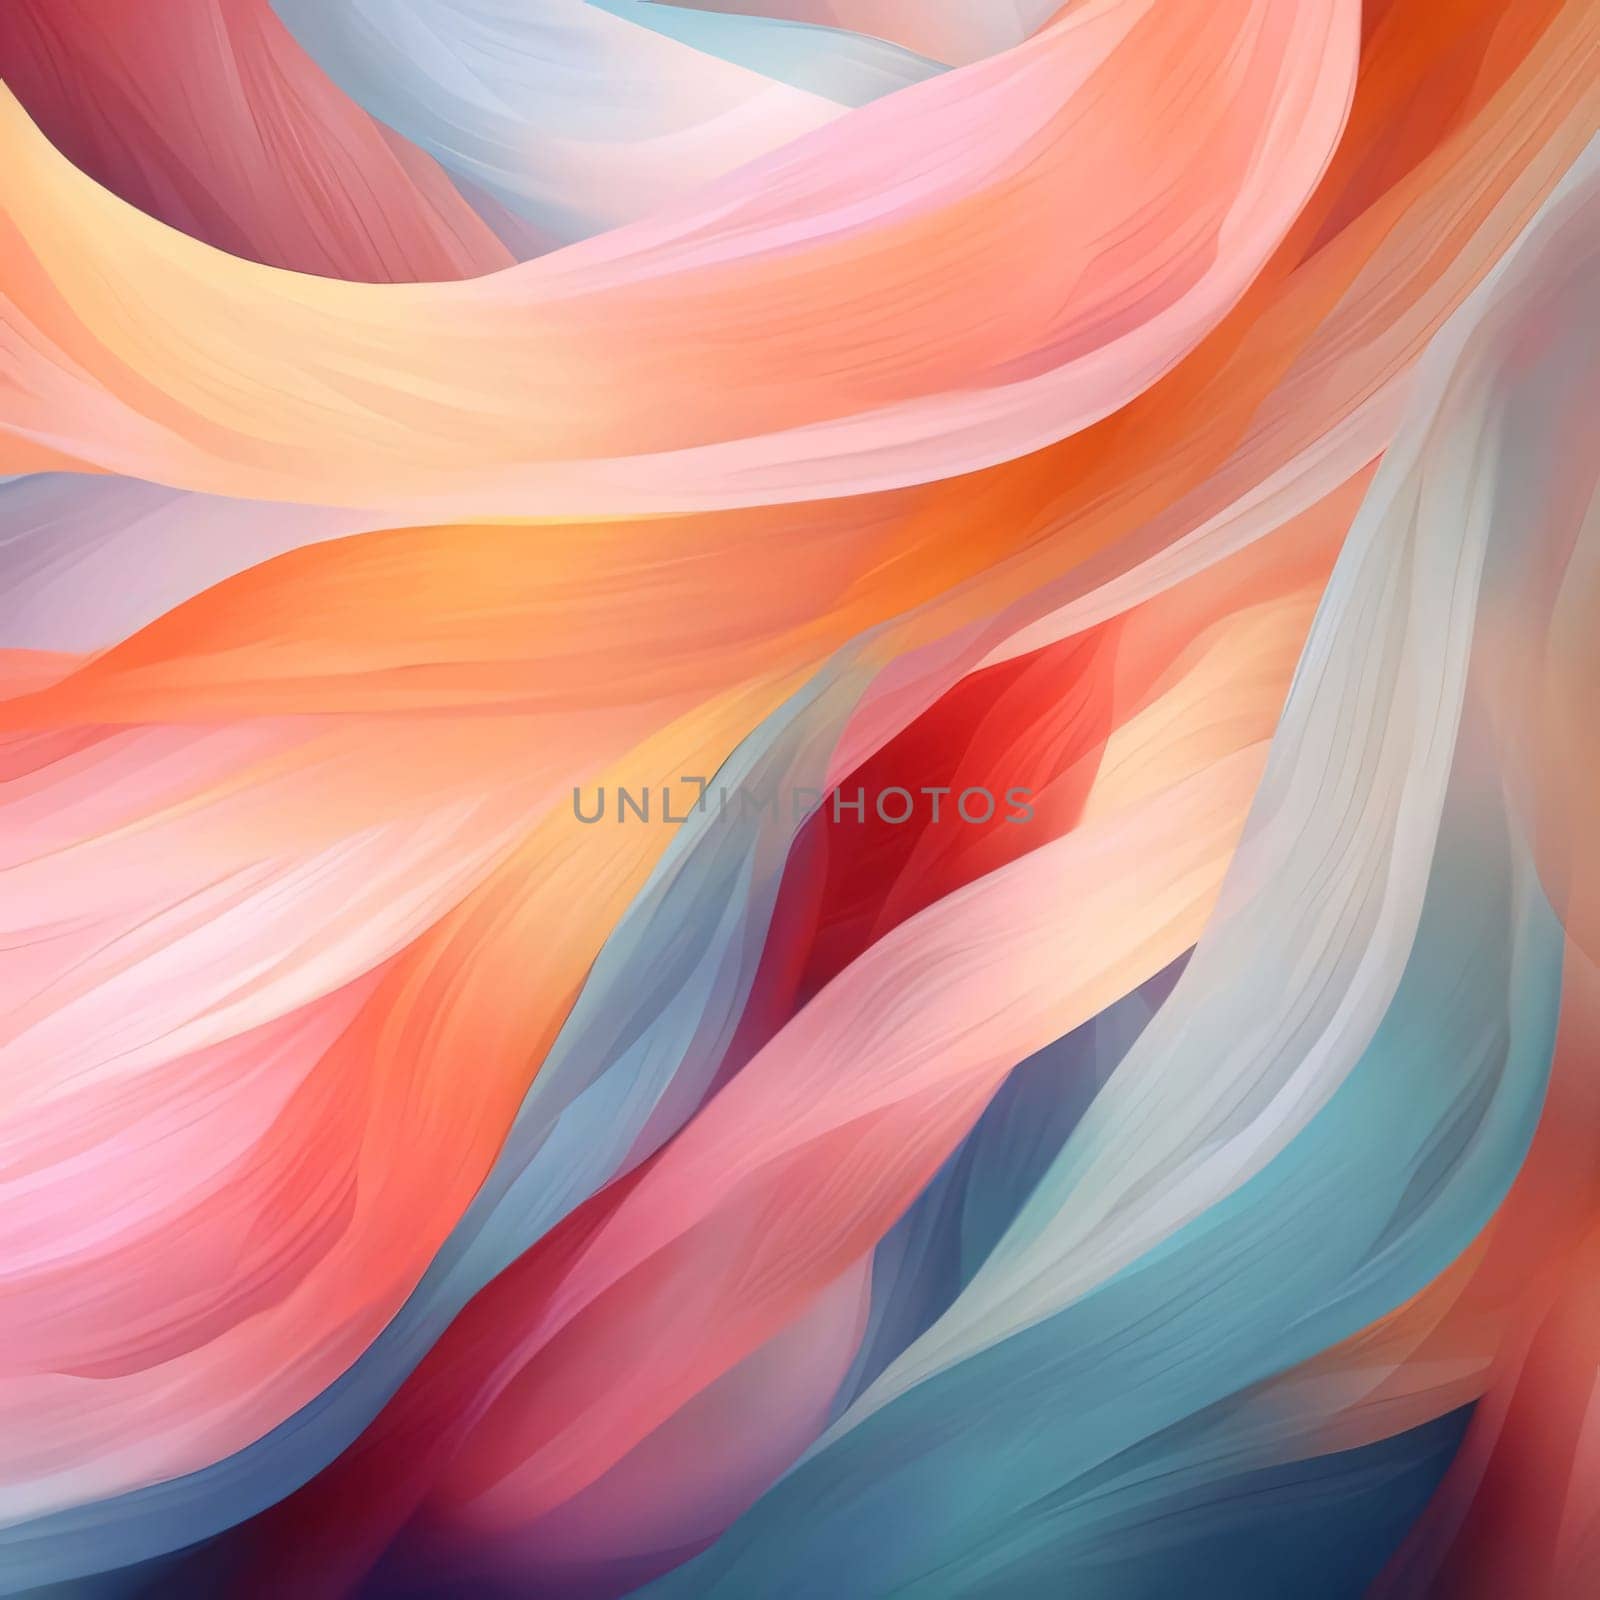 Abstract background design: abstract background with smooth lines in orange, blue and pink colors